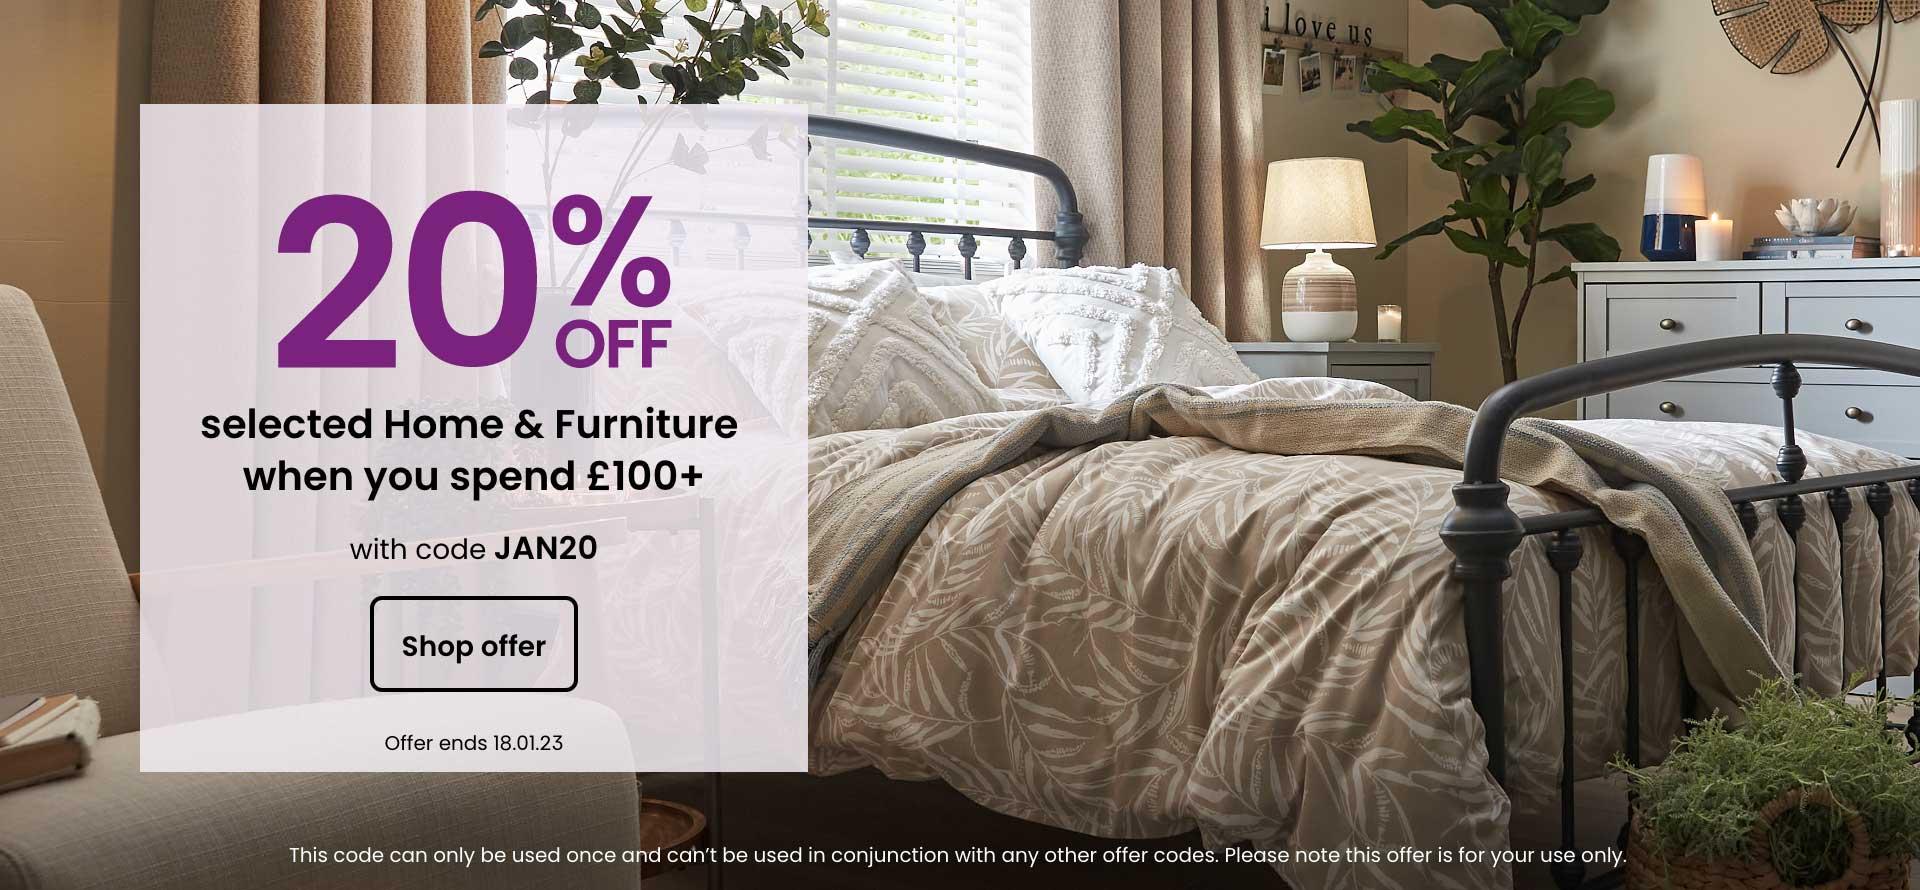 20% off selected home & furniture when you spend £100 or more with code JAN20. Shop now. Offer ends 18.01.23